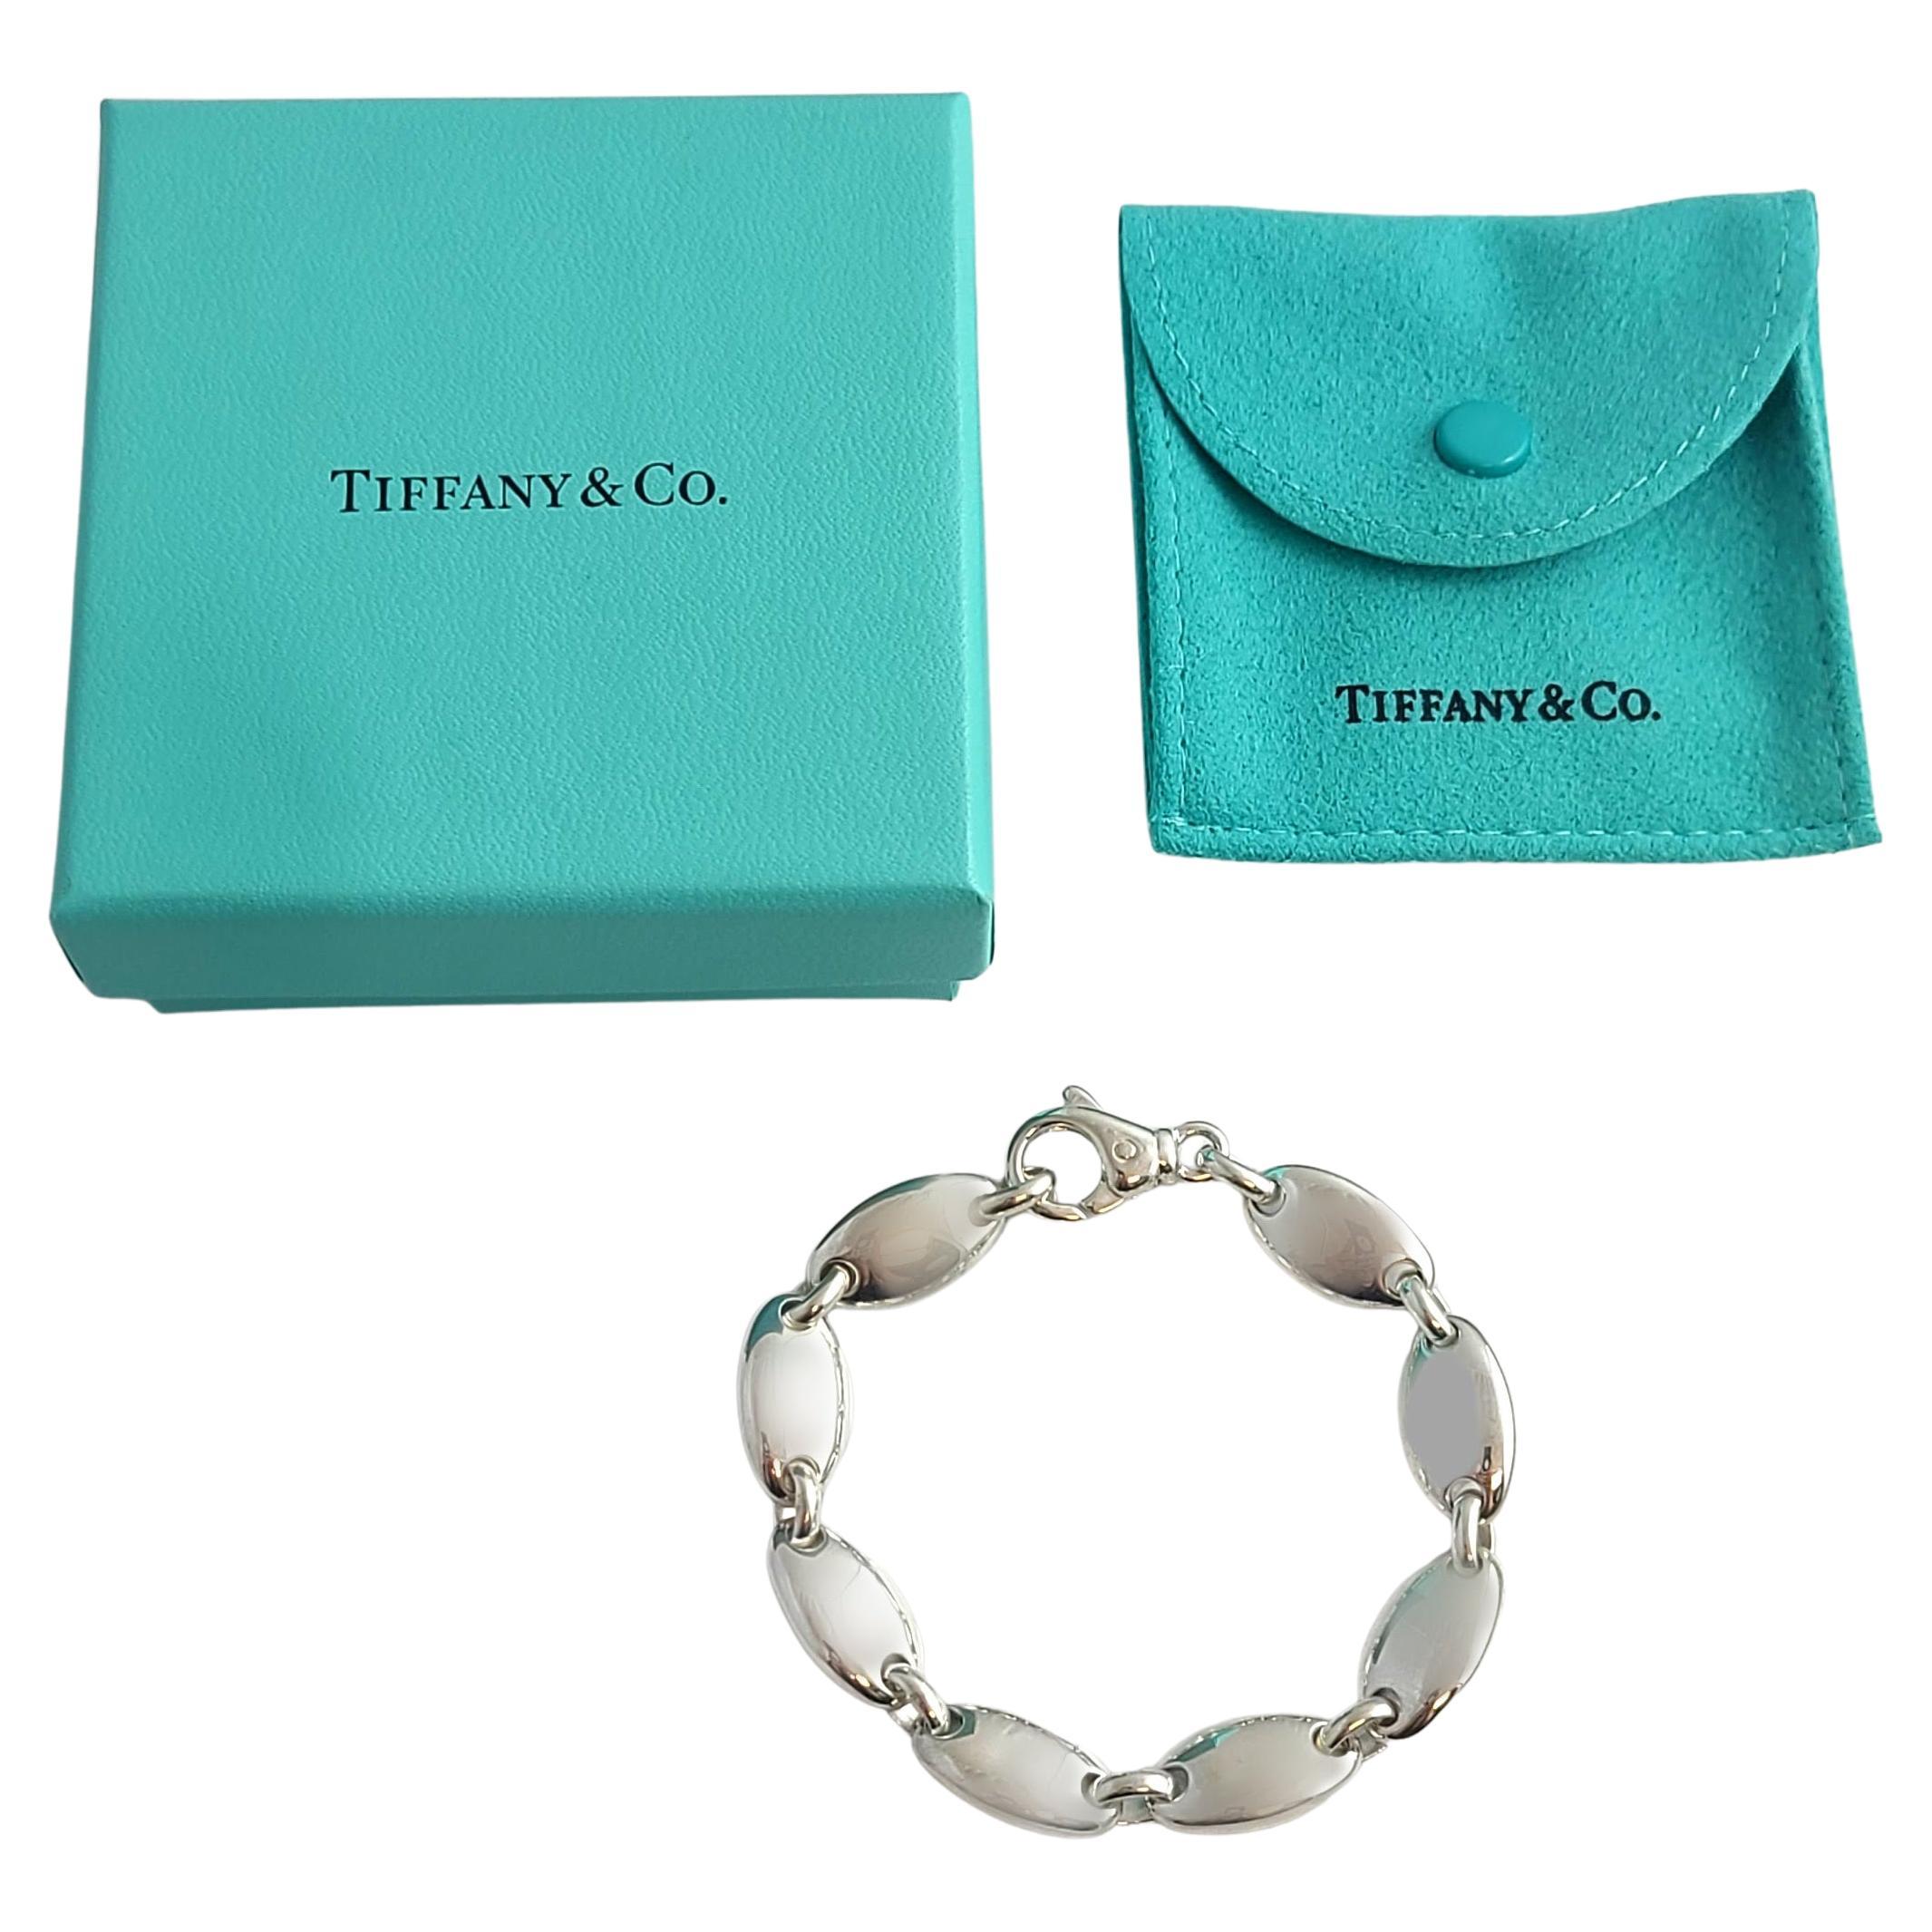 Tiffany & Co. Sterling Silver Pebble Oval Link Bracelet w/Pouch and Box